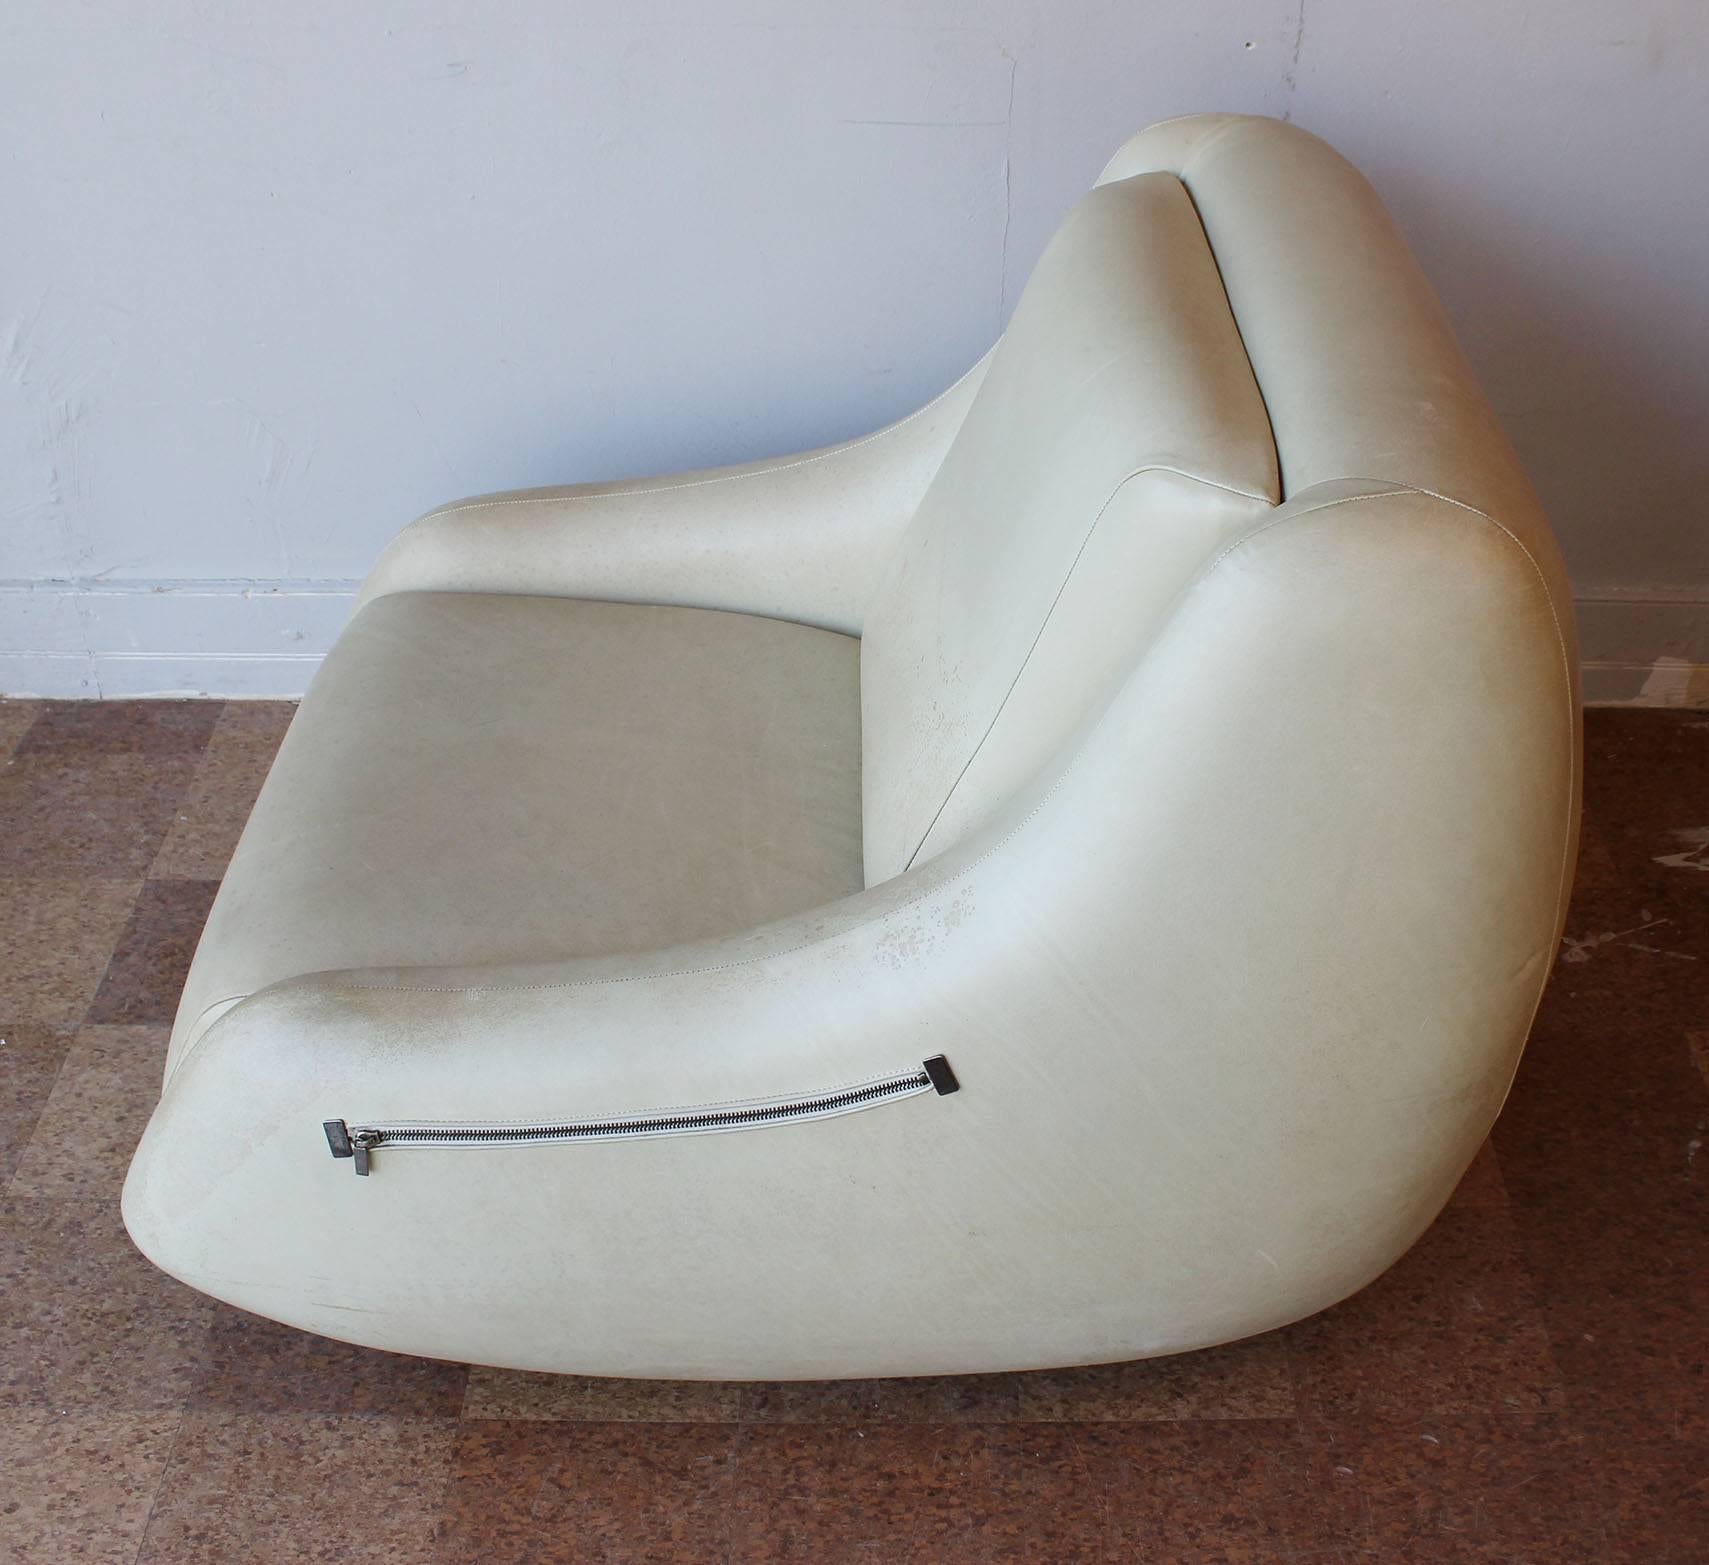 From Italy, super rare Gucci cream leather swivel lounge chairs. Superb lines. These chairs do spin 360° on an incredible heavy duty mechanism. In original upholstery. By Tom Ford, Studio Sofield for Gucci.

these chairs are also available for